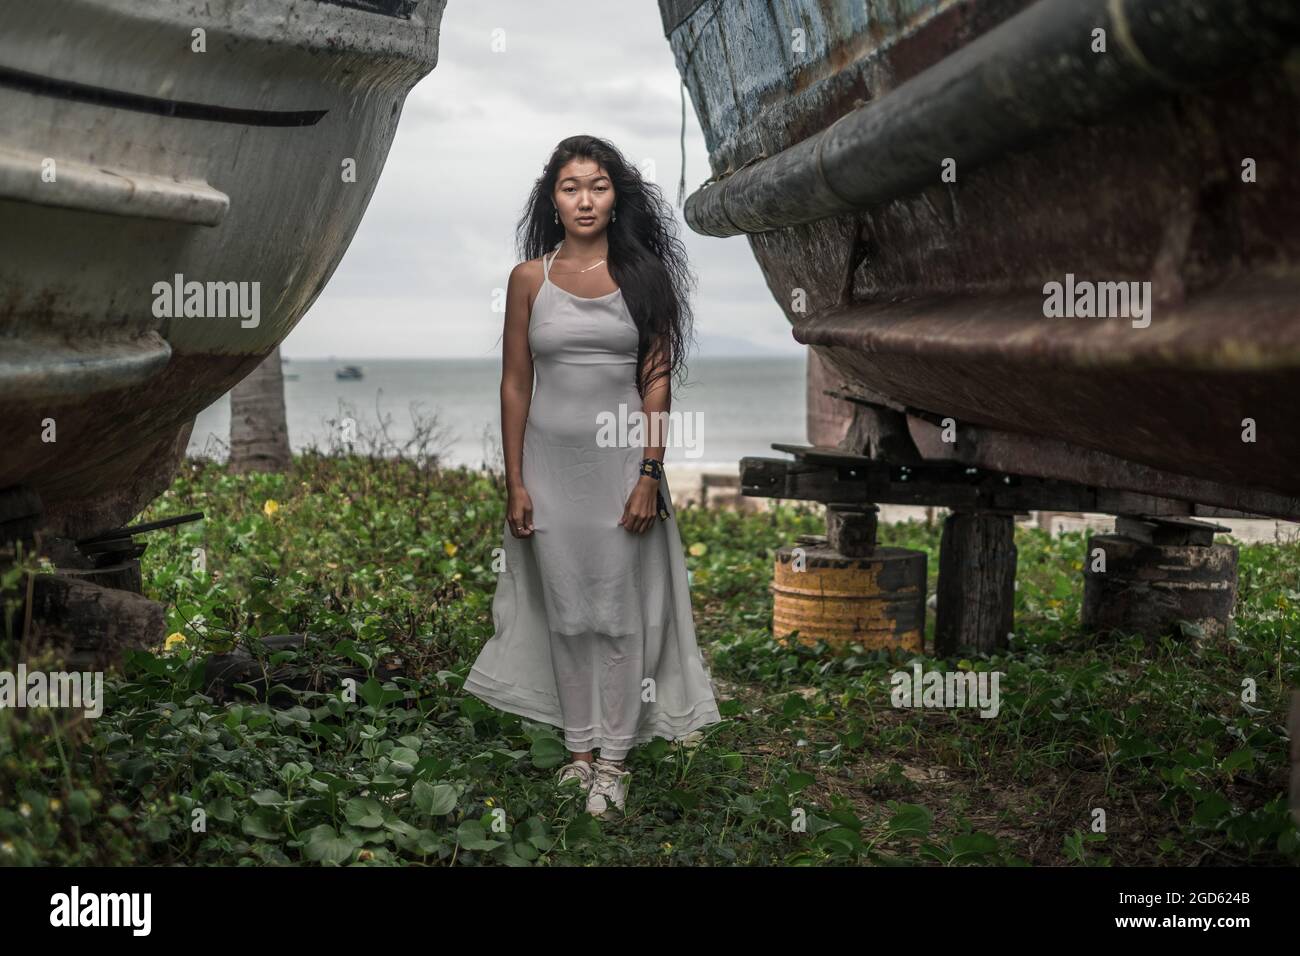 Charming young mongol woman in bright grey dress standing between two old wooden ships. Black long curly hair. Looking at camera with copy space. Stock Photo